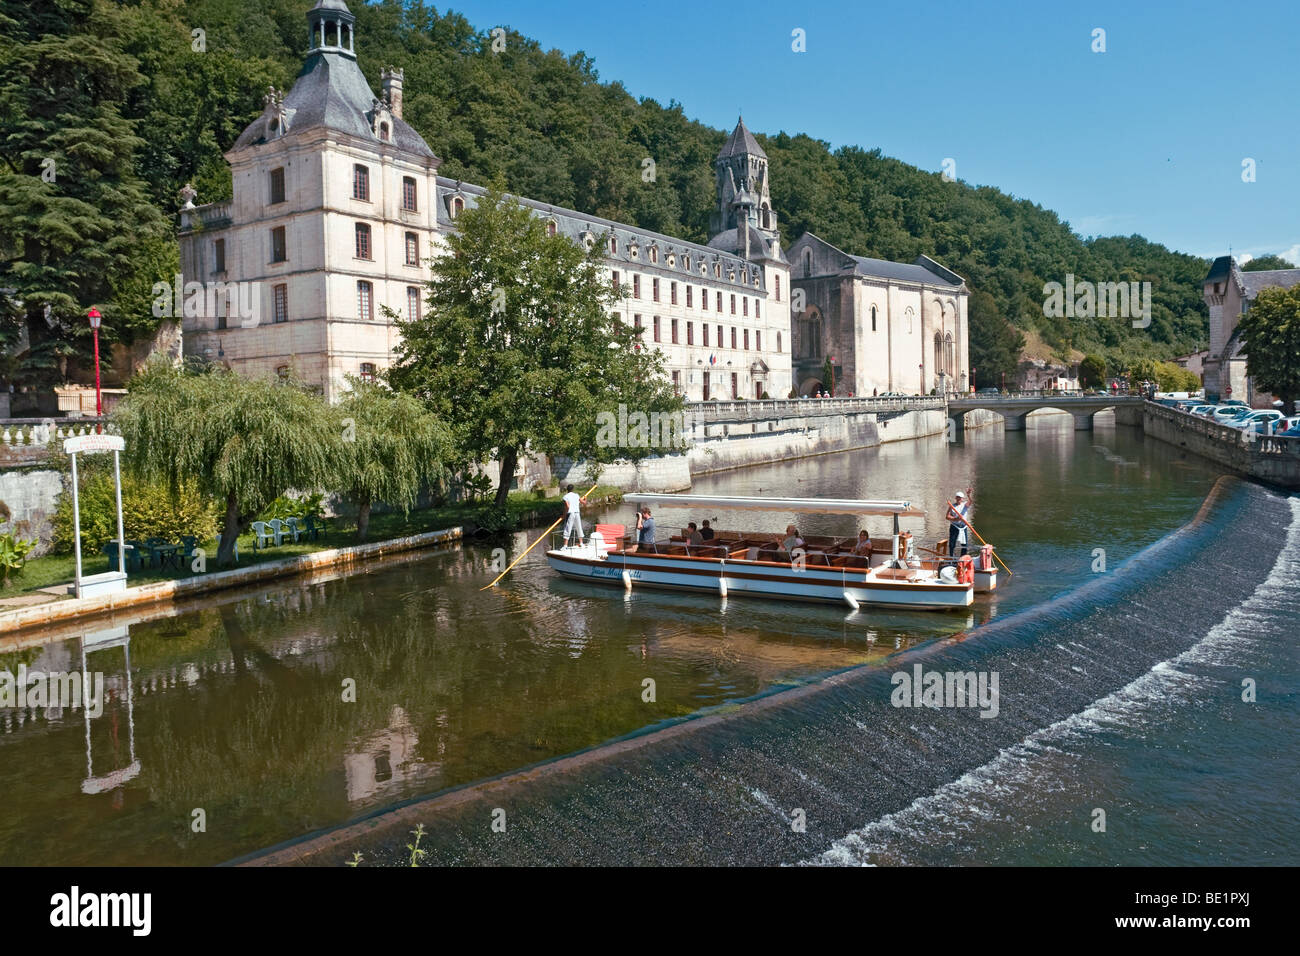 Brantome Abbey on the banks of the river Dronne, Brantome, Dordogne, France Stock Photo